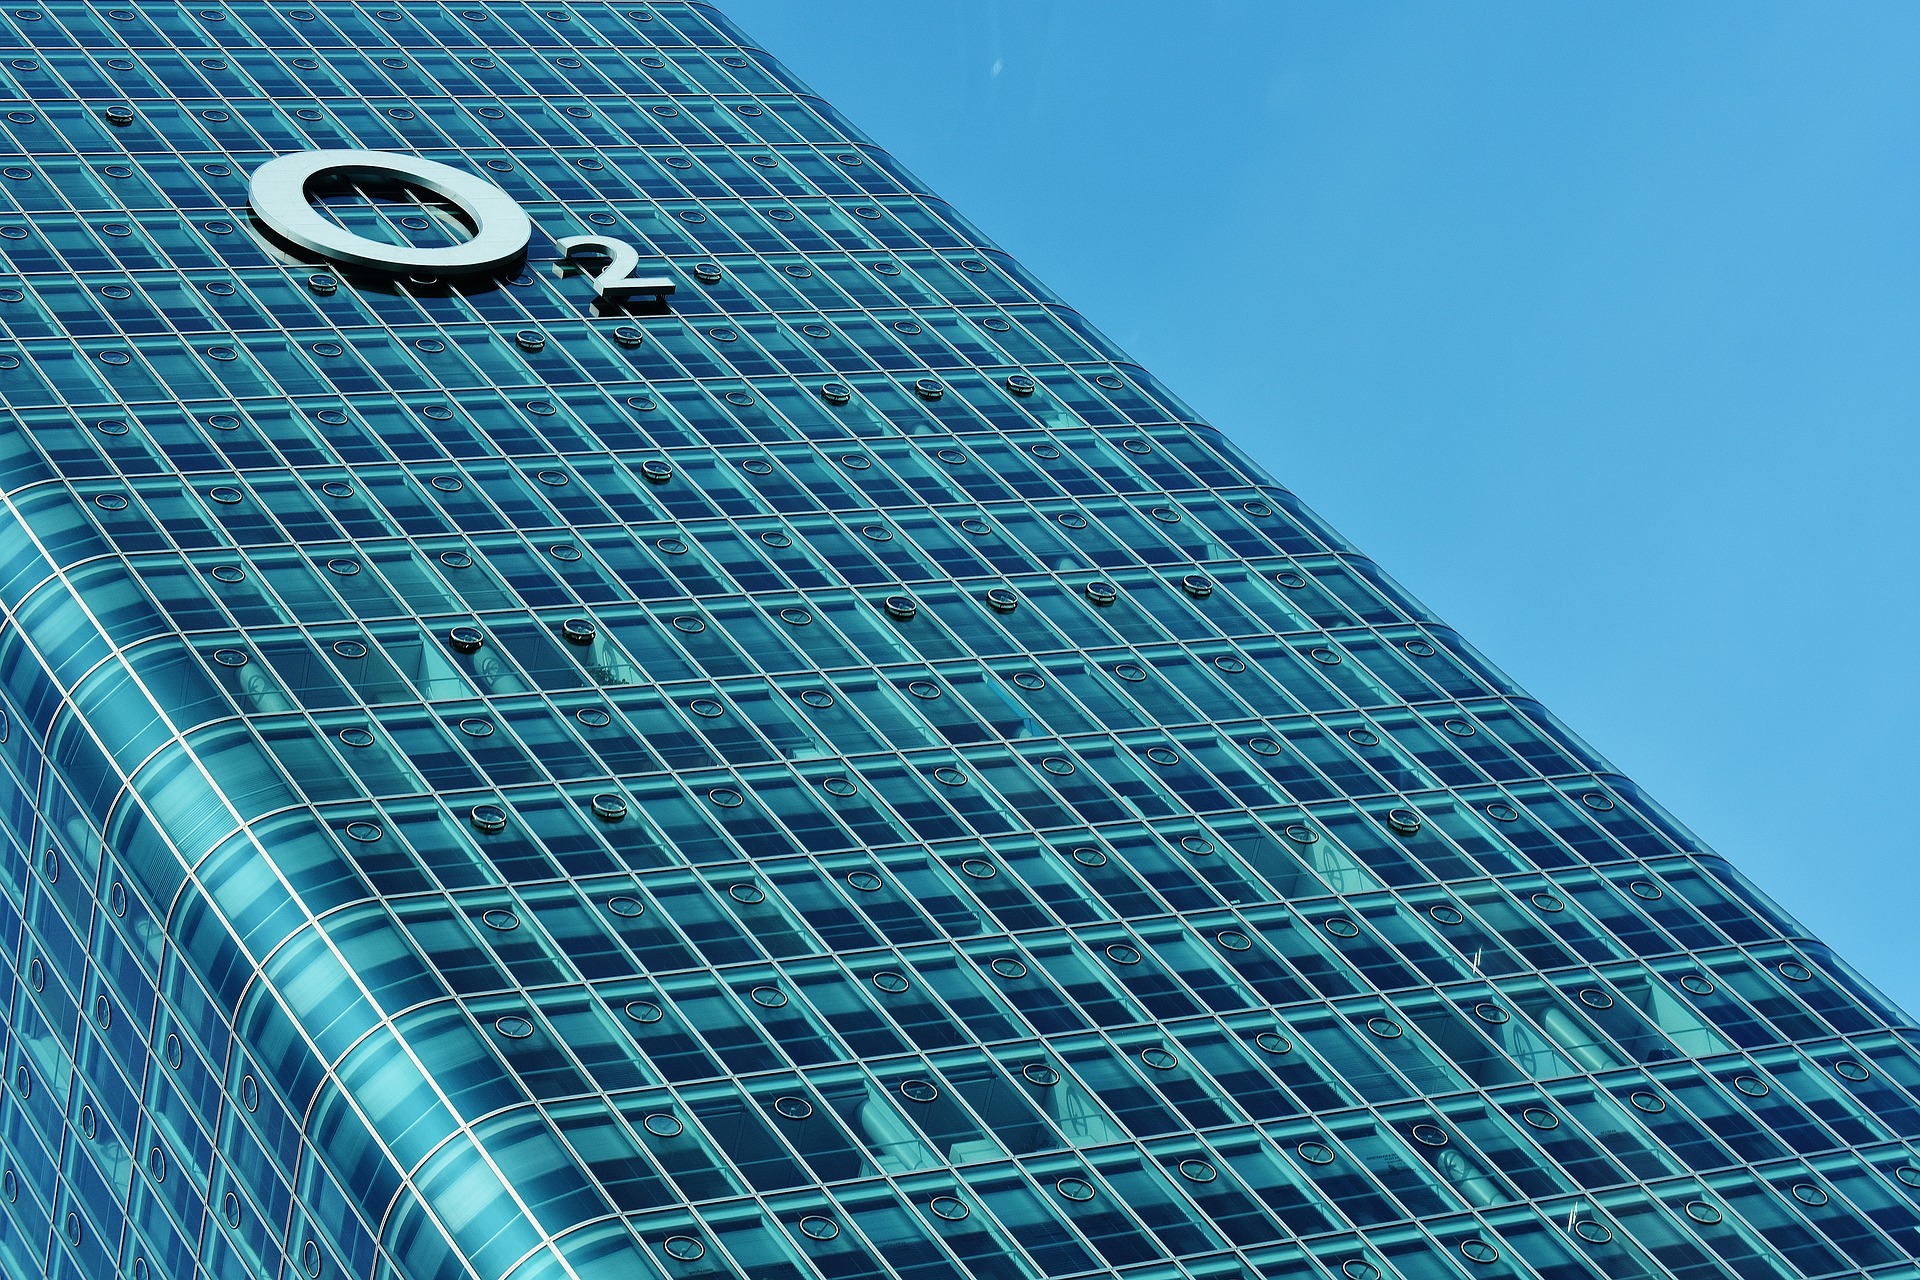 Serious Fraud Office Probing O2 Bribery Allegations